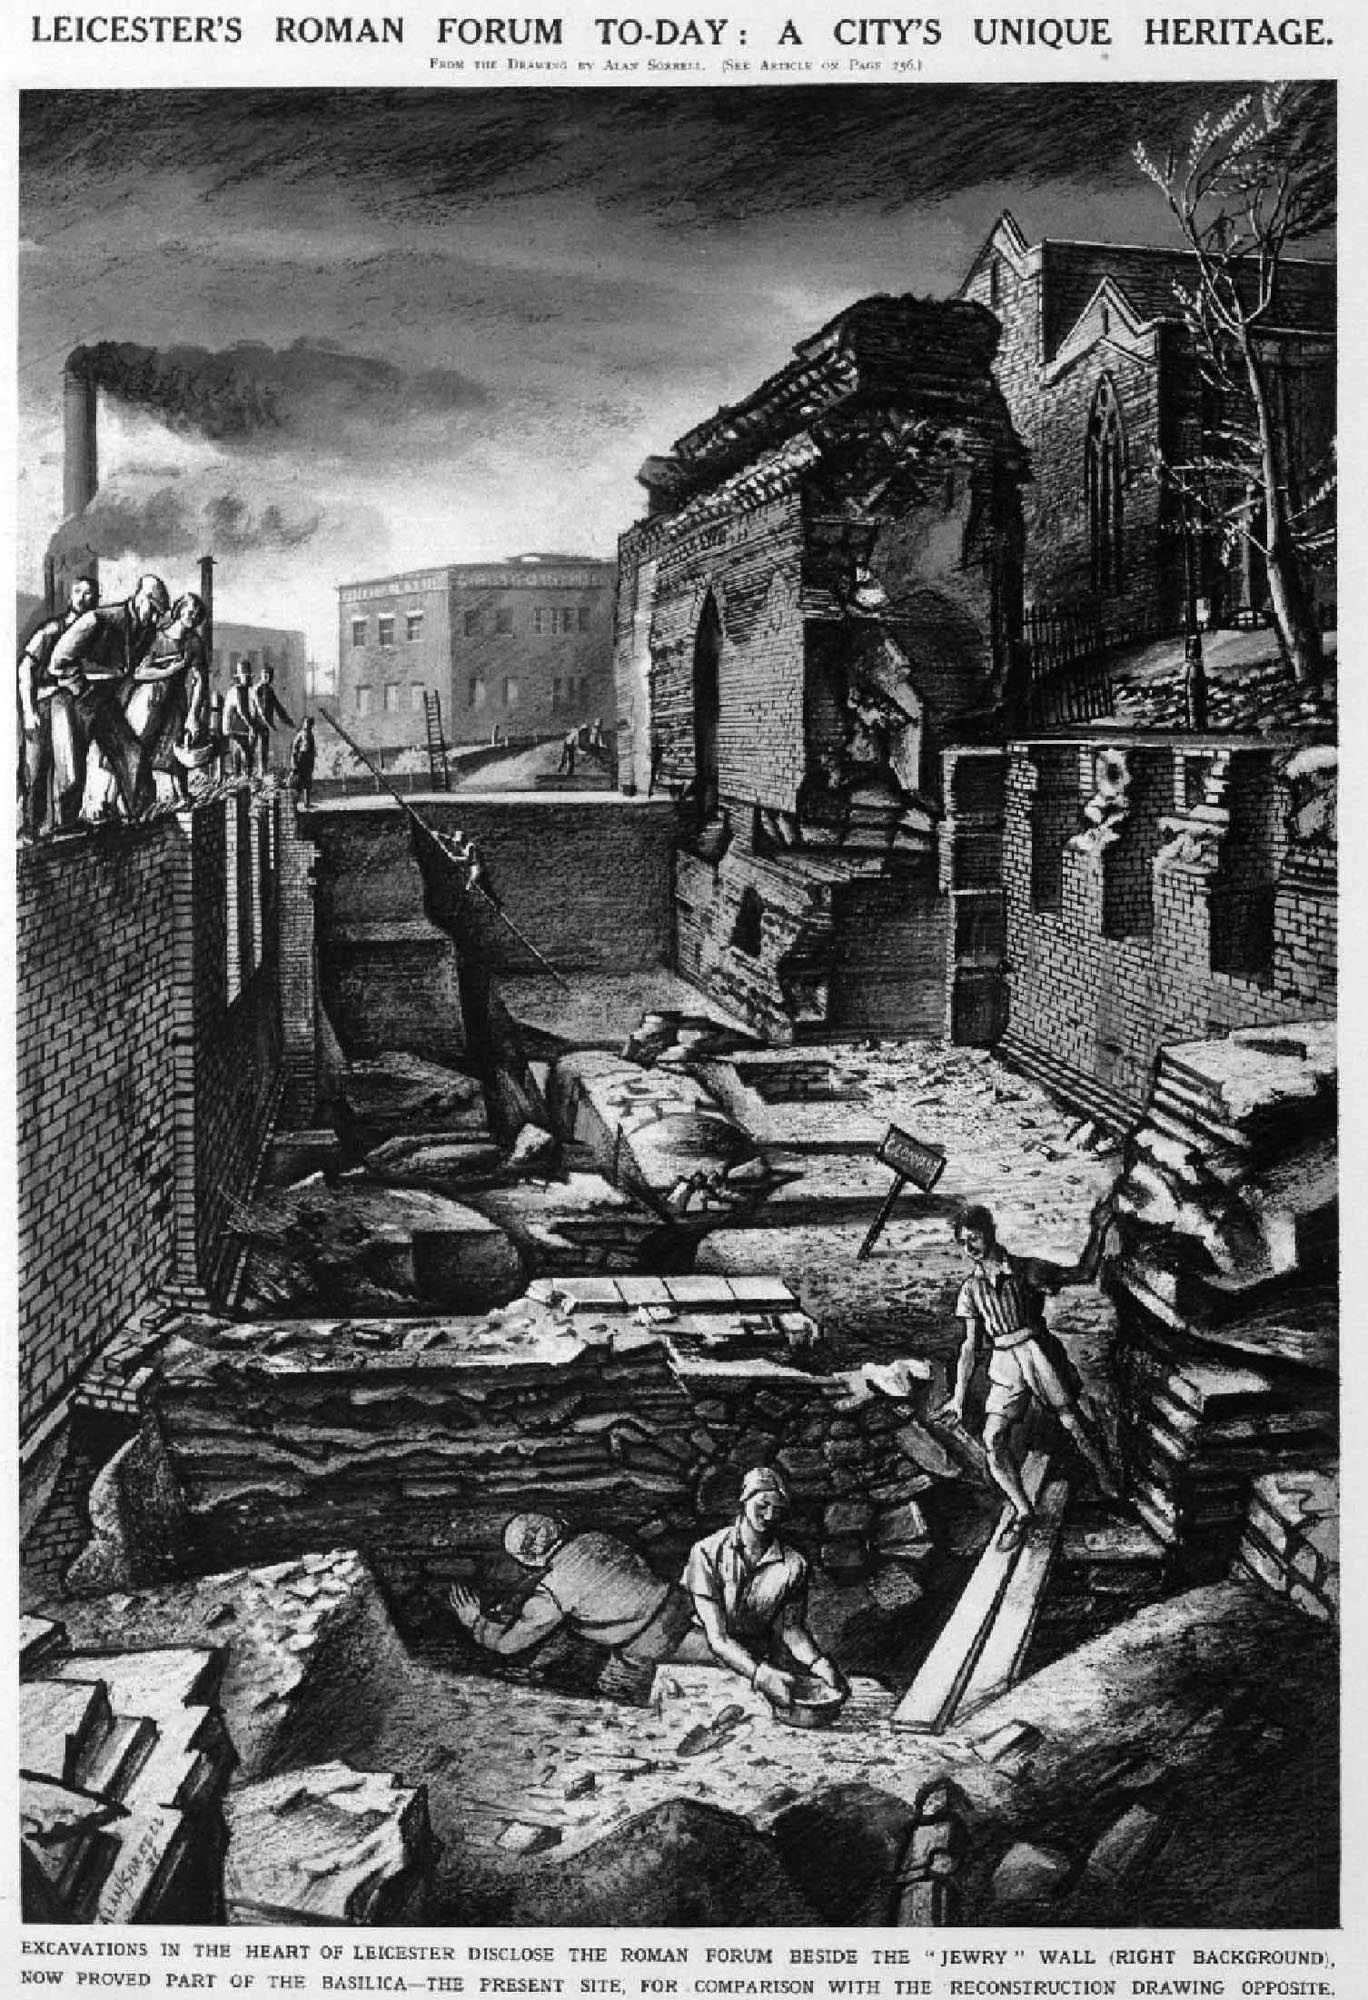 Excavations in the heart of Leicester… beside the ‘Jewry’ Wall - A. Sorrell, London Illustrated News 1930s